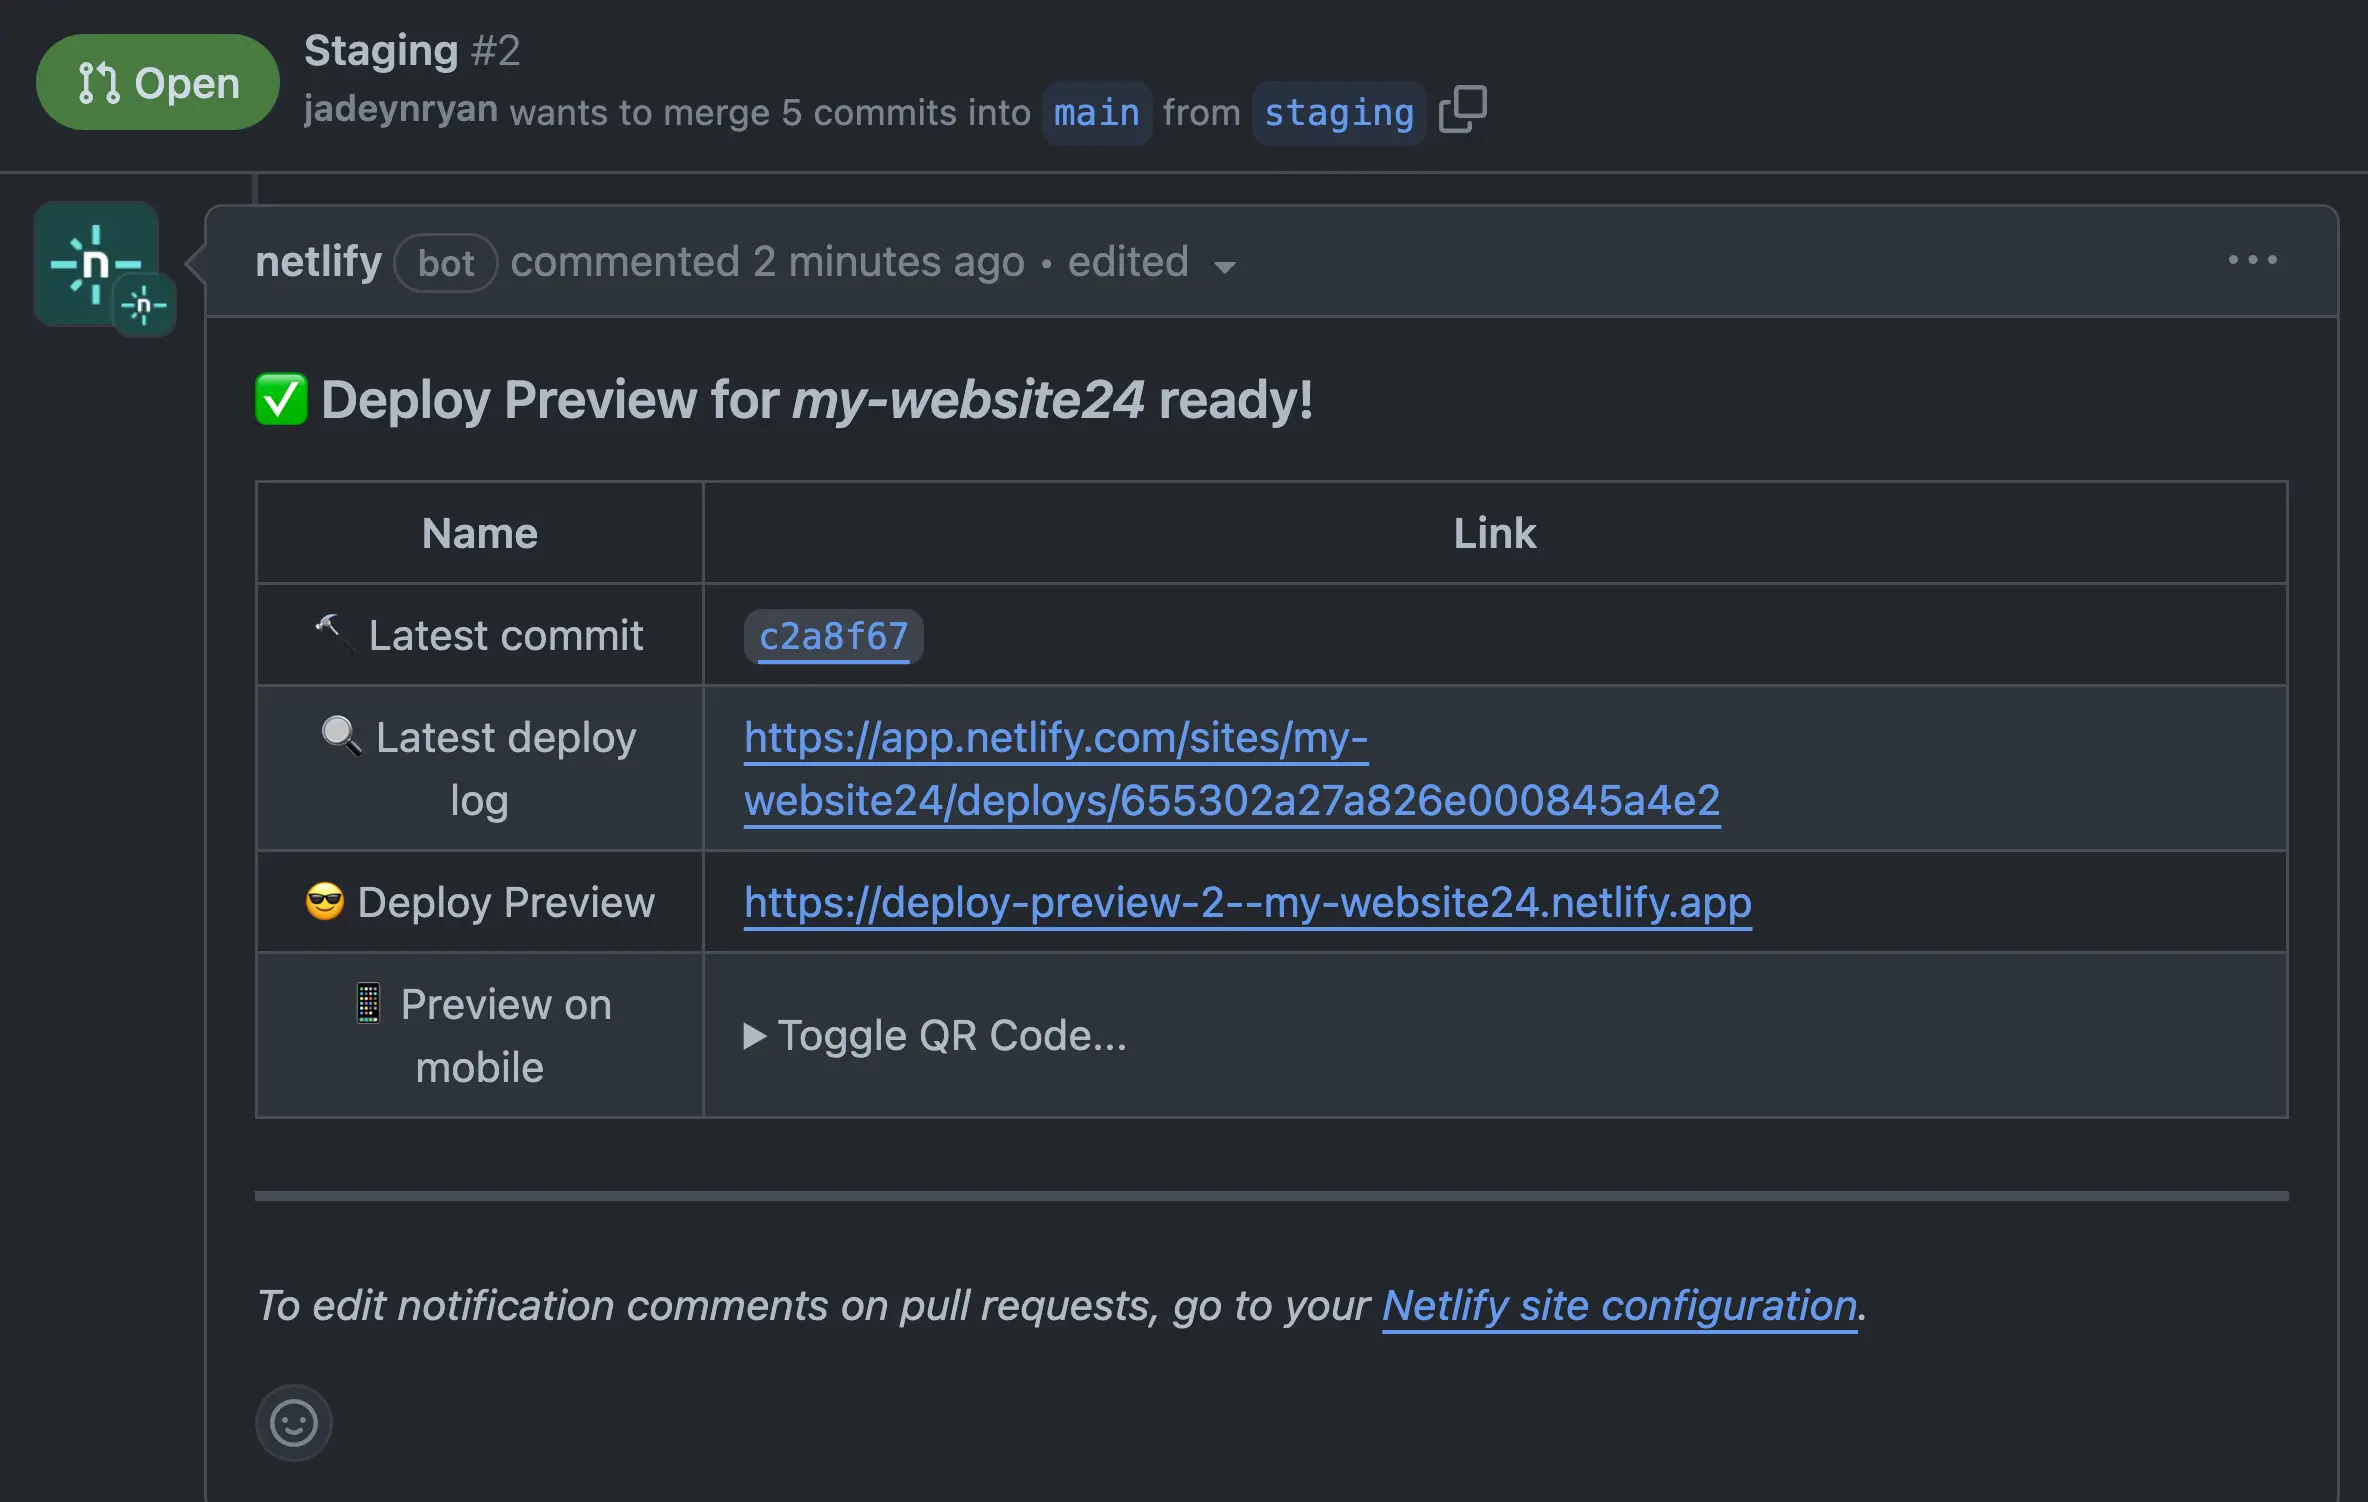 GitHub merge request. Netlify bot commented a table with links to the latest commit, latest deploy log, deploy preview, and preview on mobile QR code.